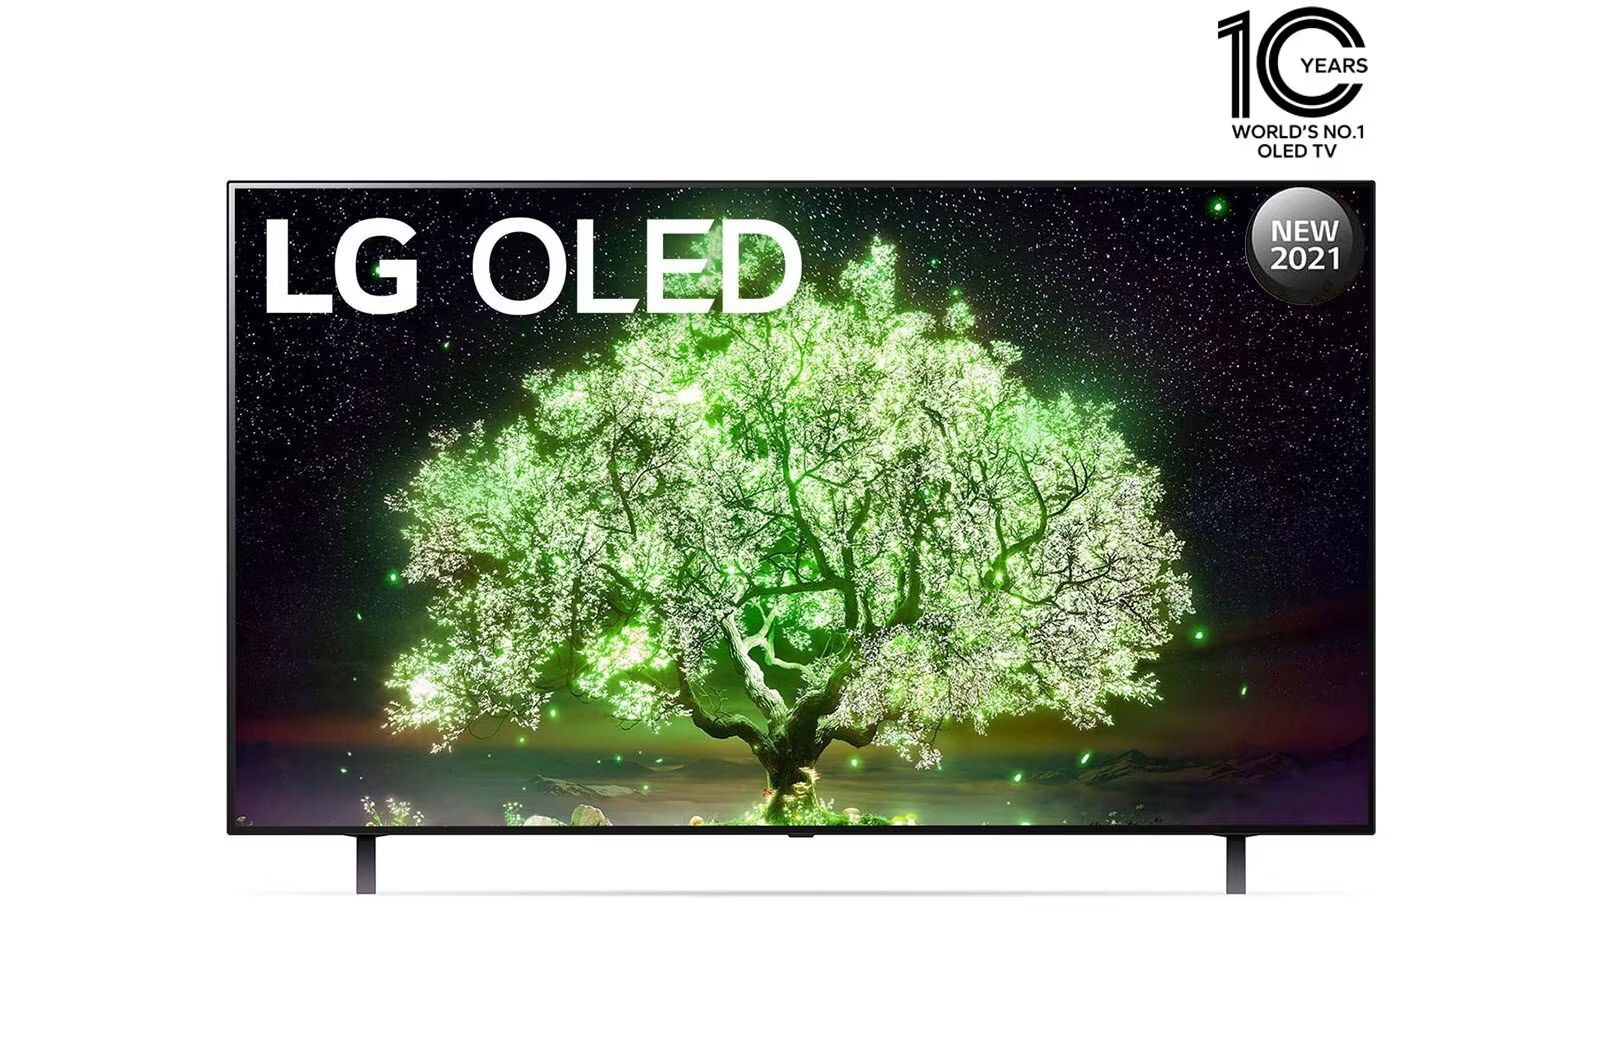 How To Turn Off Voice On LG OLED TV